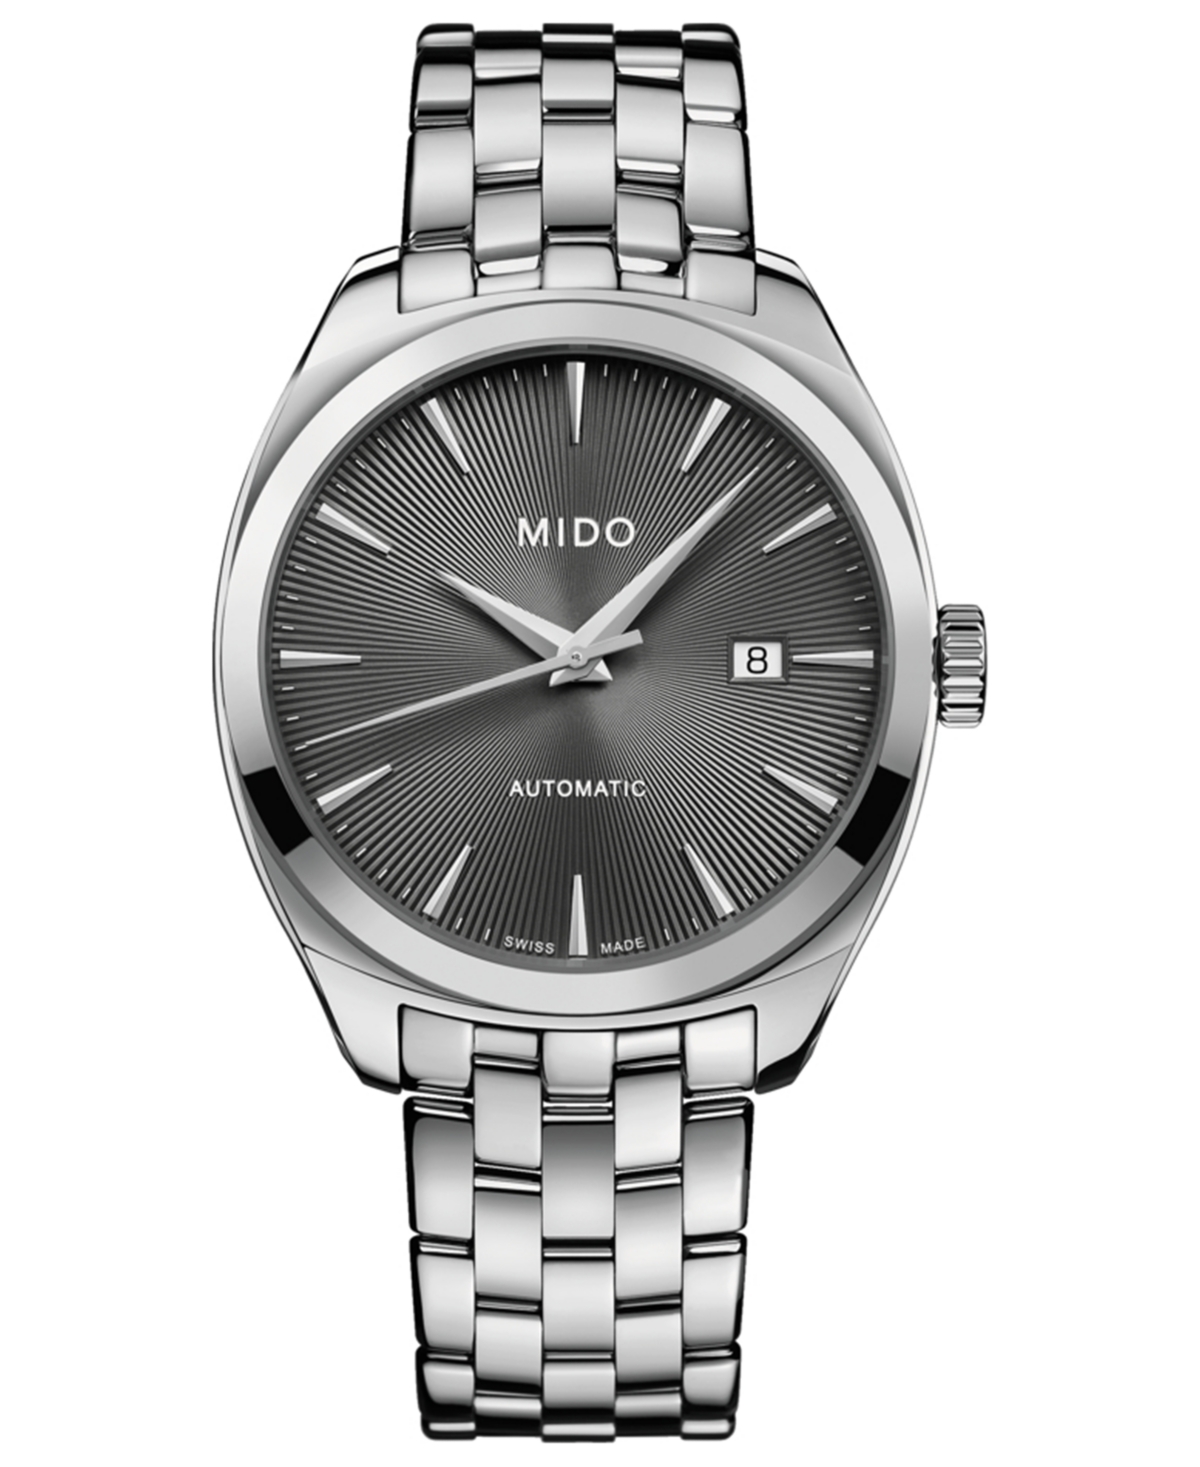 Mido Men's Swiss Automatic Belluna Royal Stainless Steel Bracelet Watch 41mm In Anthracite